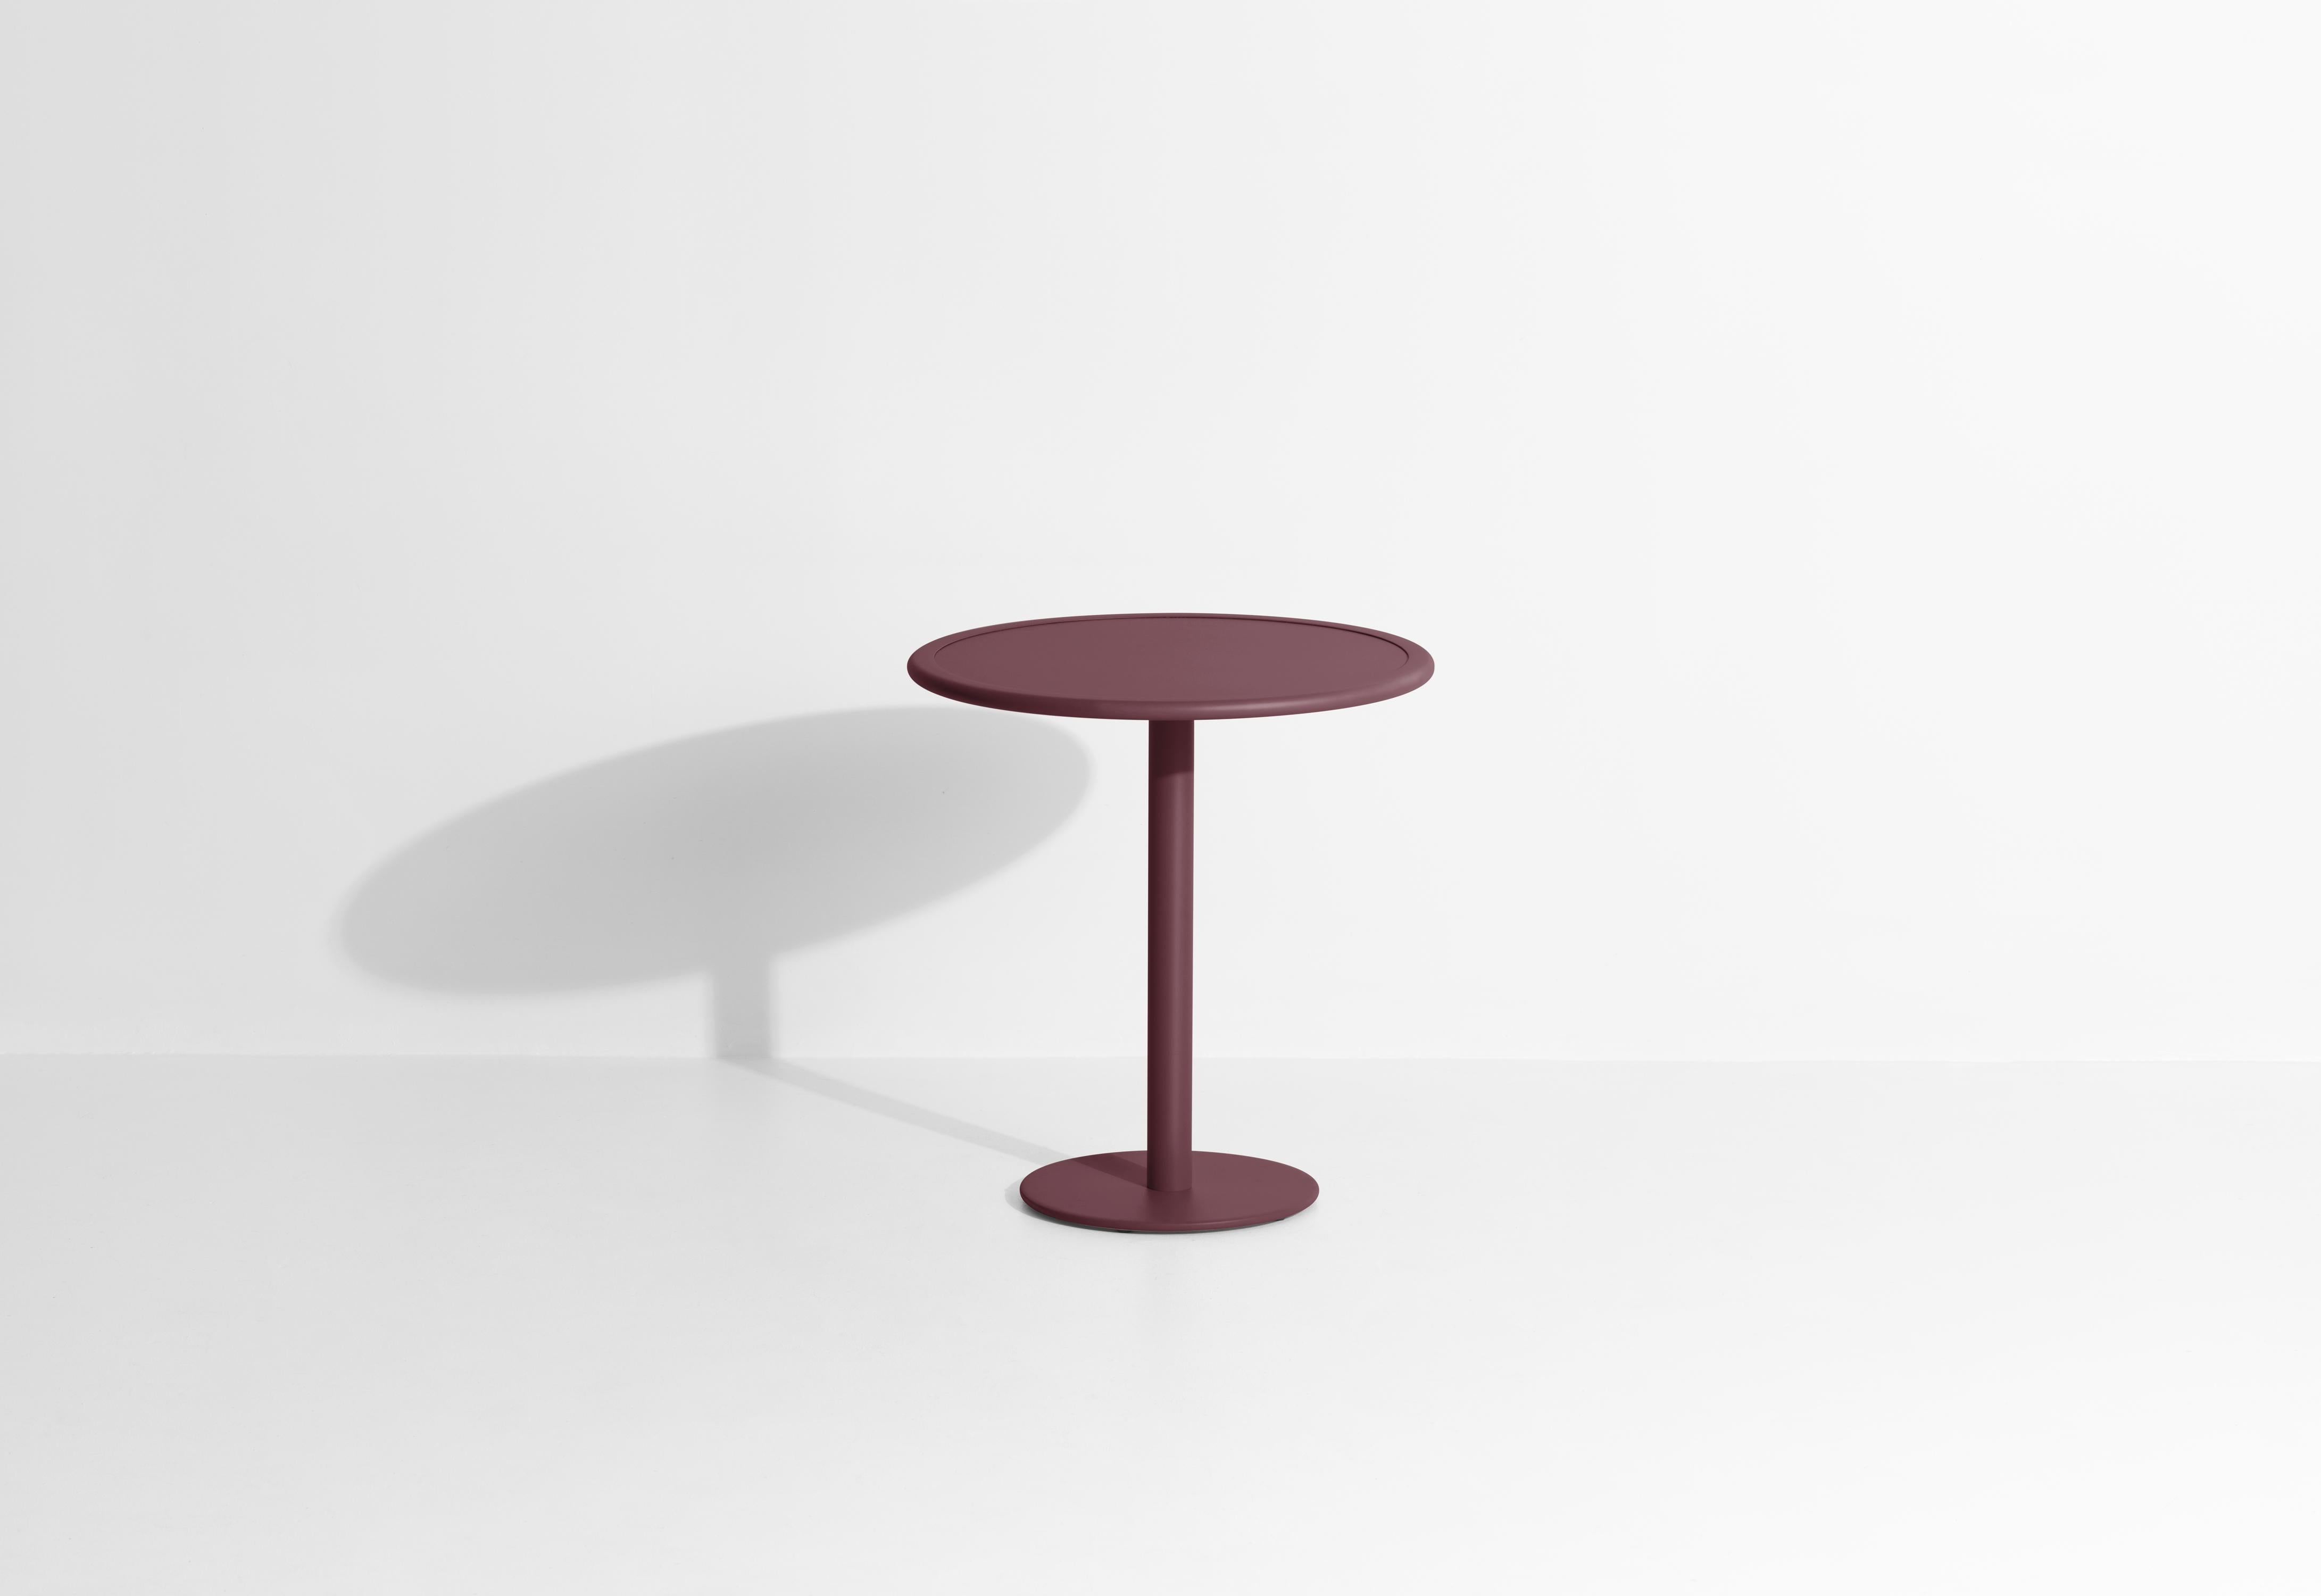 Petite Friture Week-End Bistro Round Dining Table in Burgundy Aluminium by Studio BrichetZiegler, 2017

The week-end collection is a full range of outdoor furniture, in aluminium grained epoxy paint, matt finish, that includes 18 functions and 8